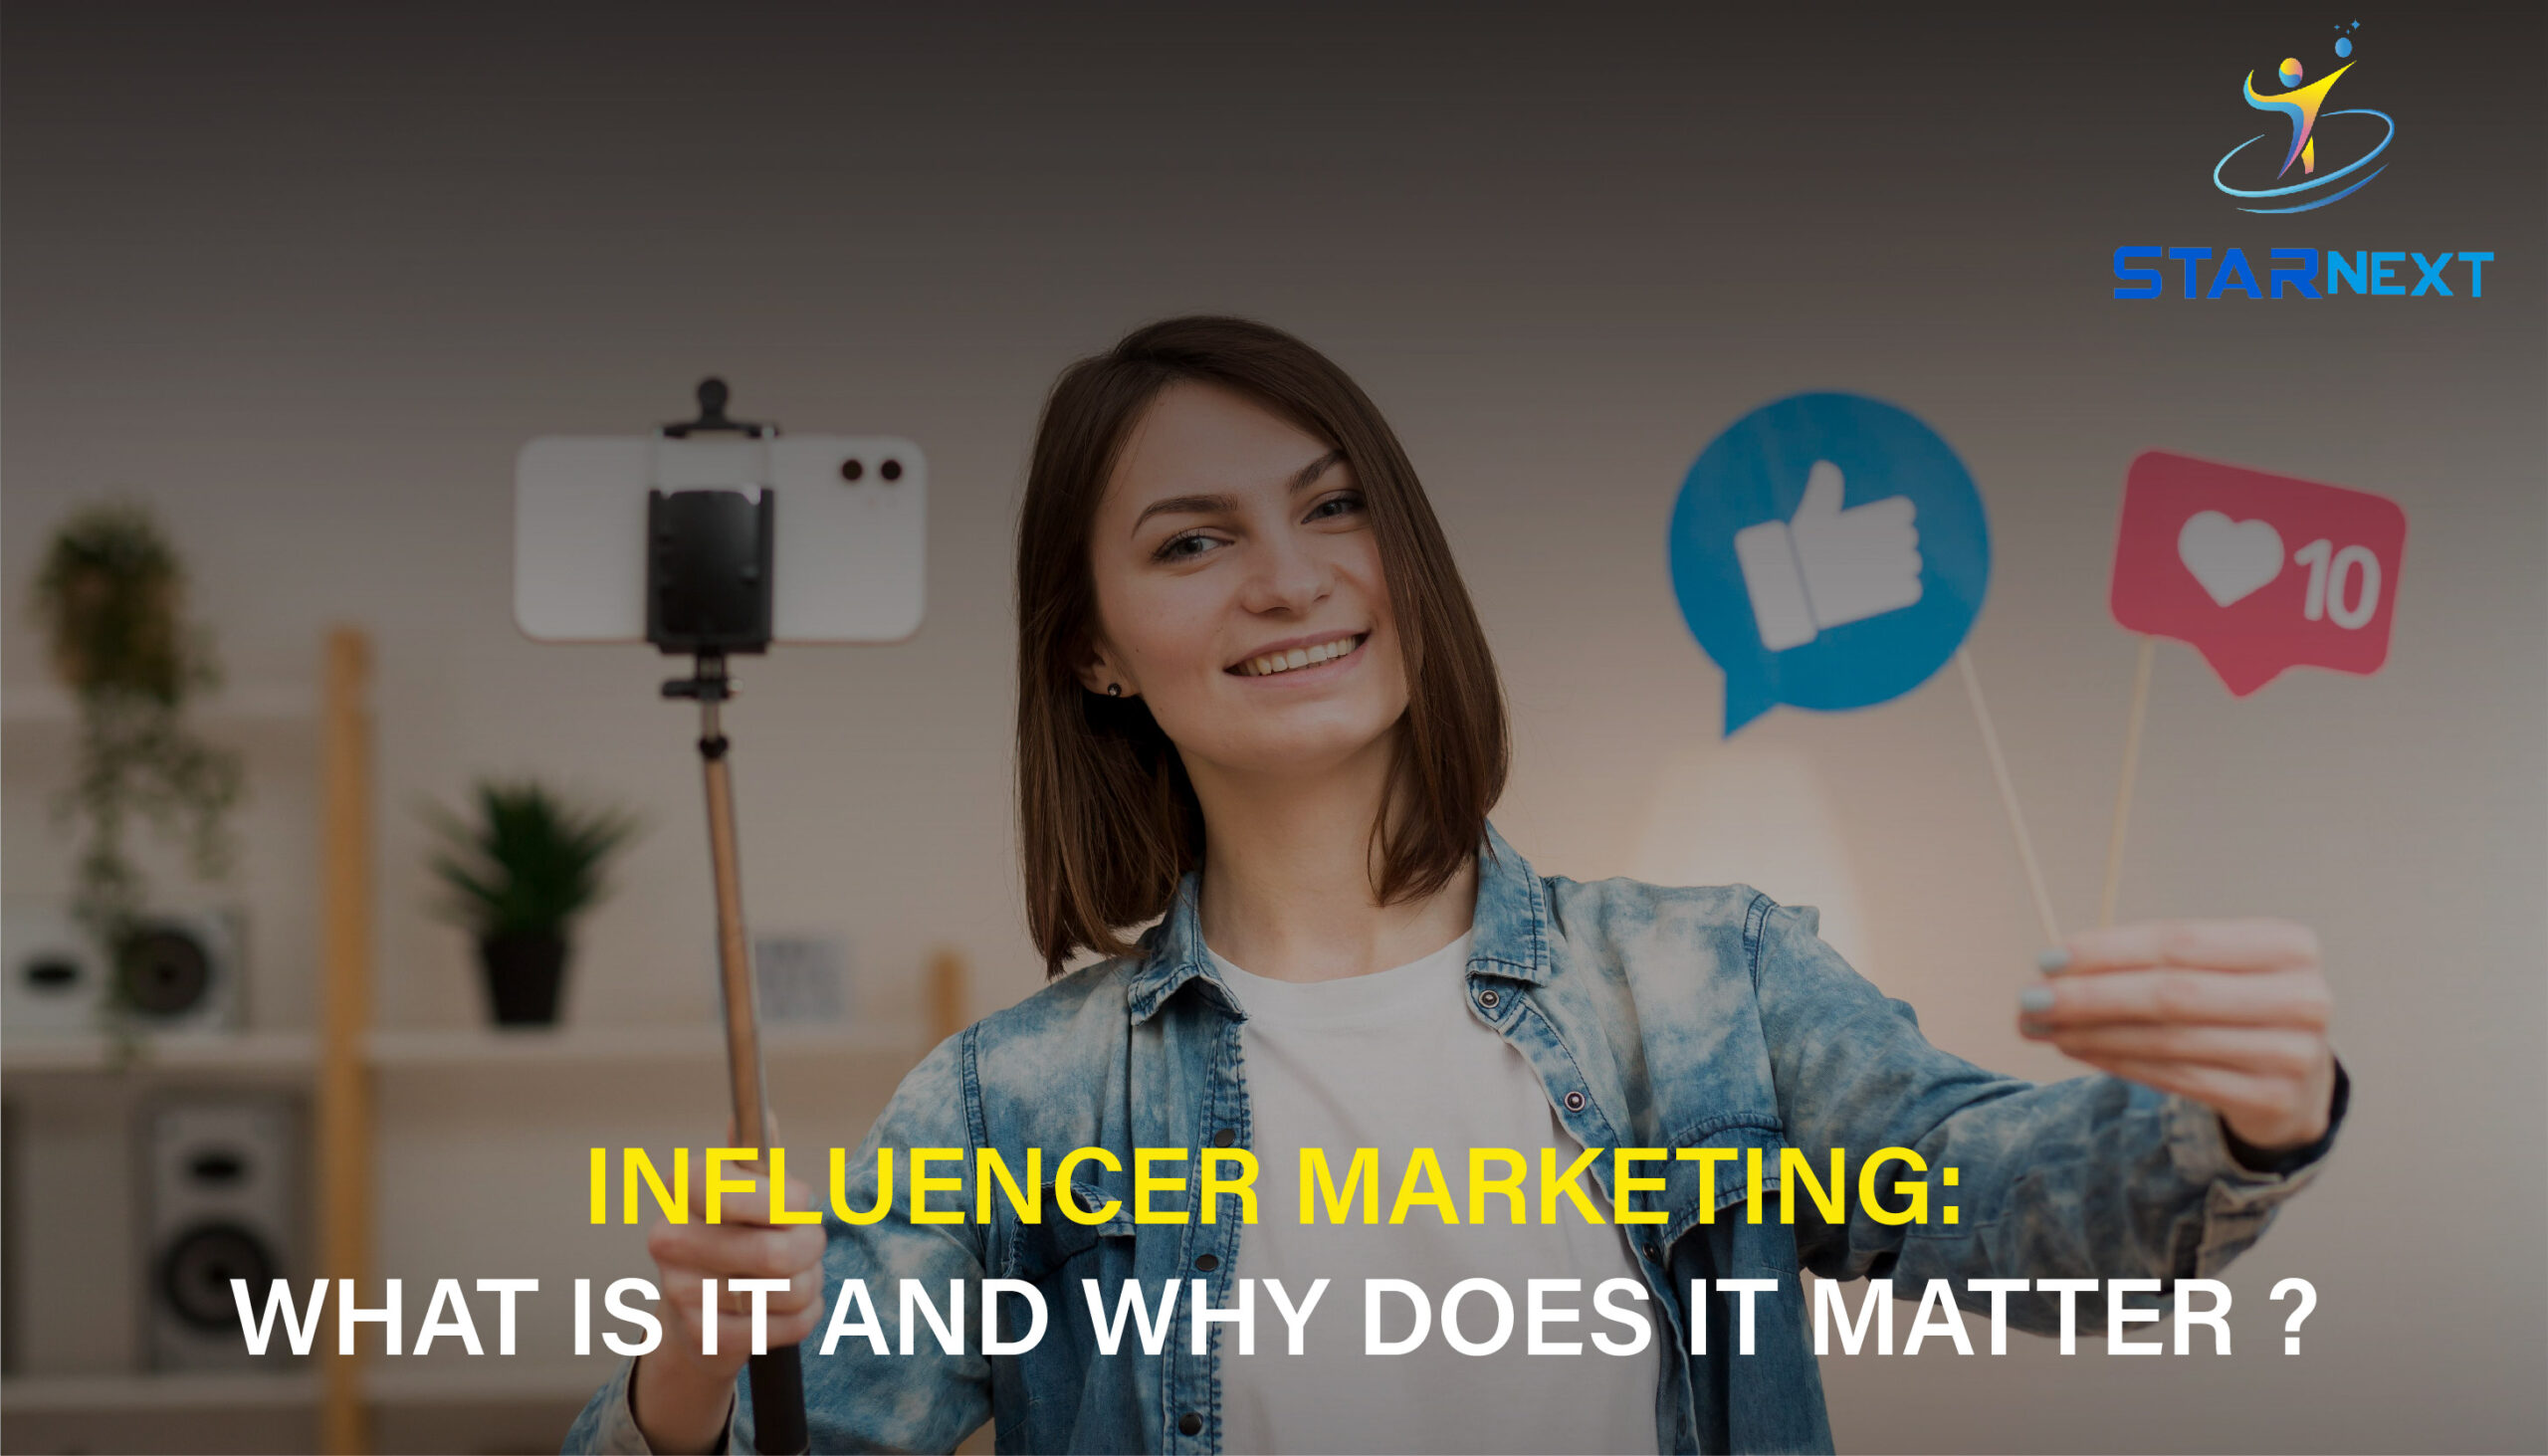 Influencer Marketing: What Is It And Why Does It Matter?